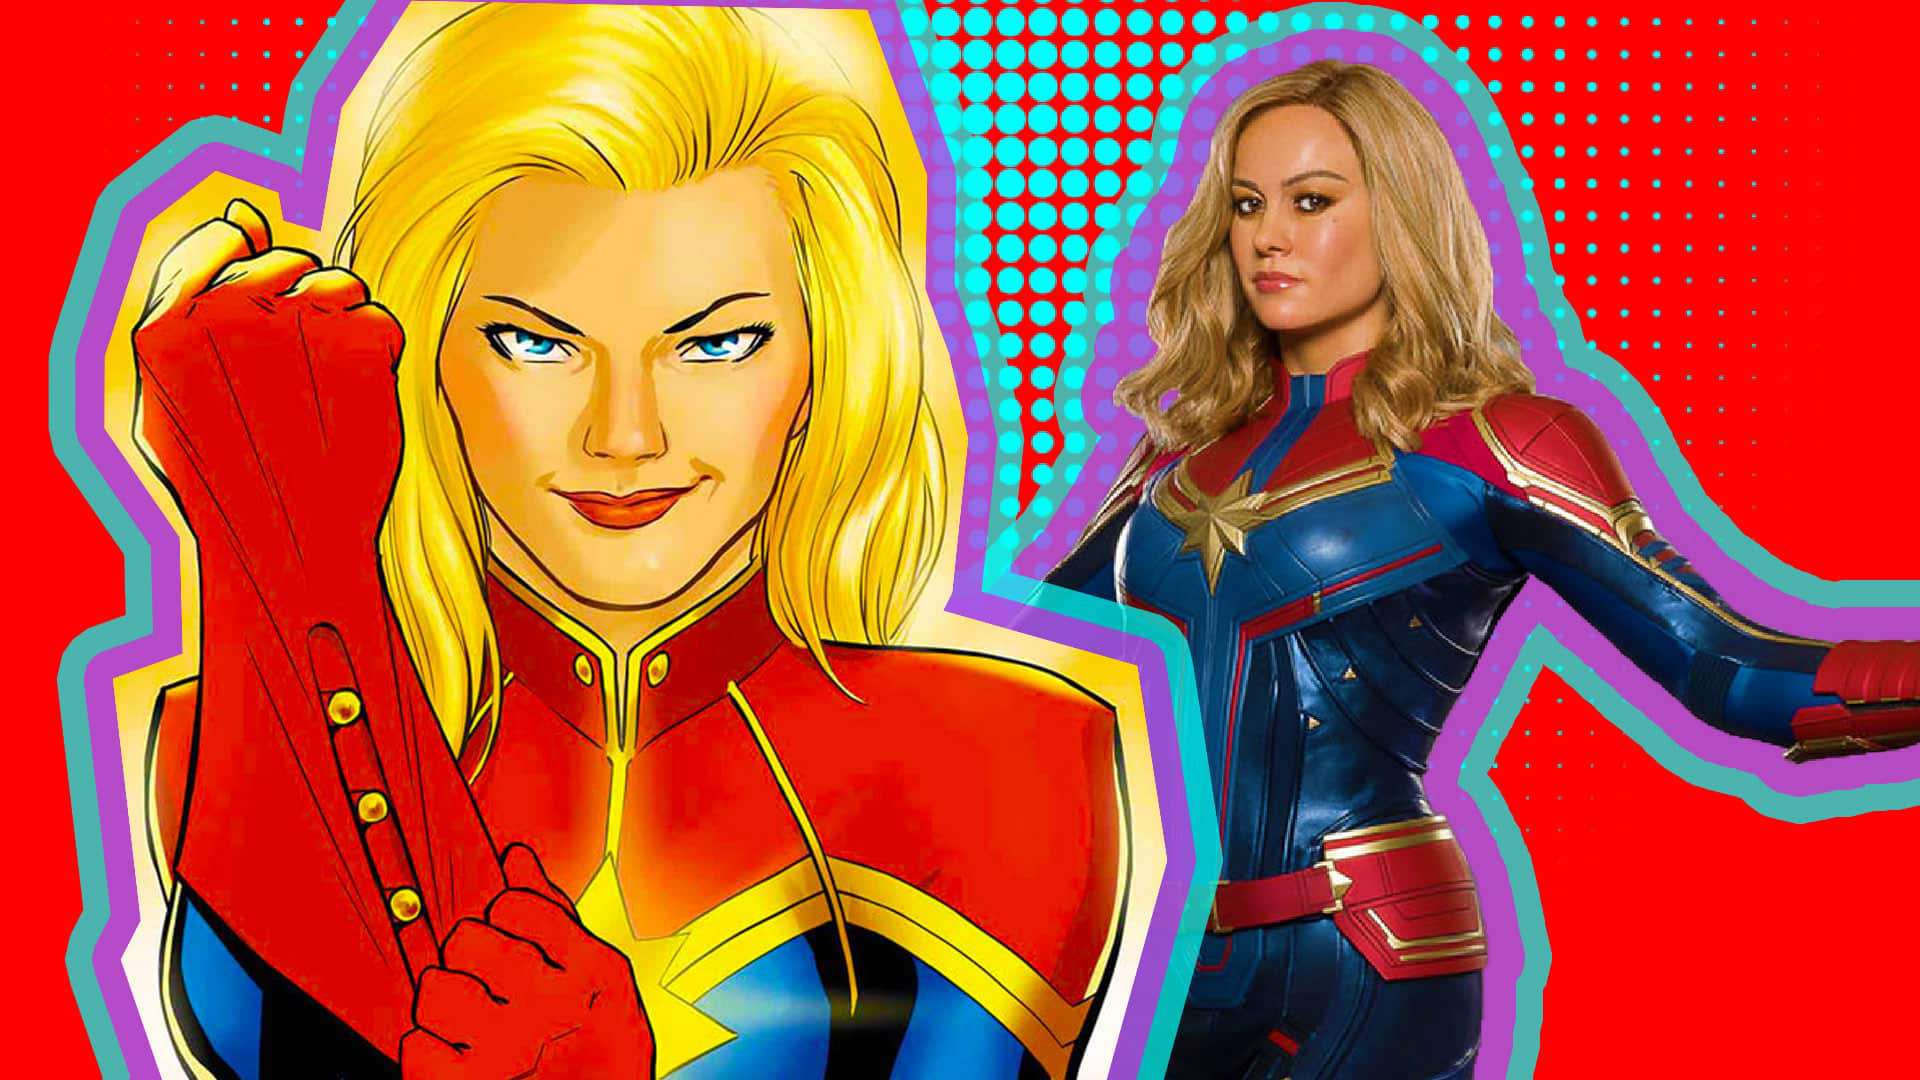 No, Captain Marvel Is NOT The Most Powerful Marvel Superhero